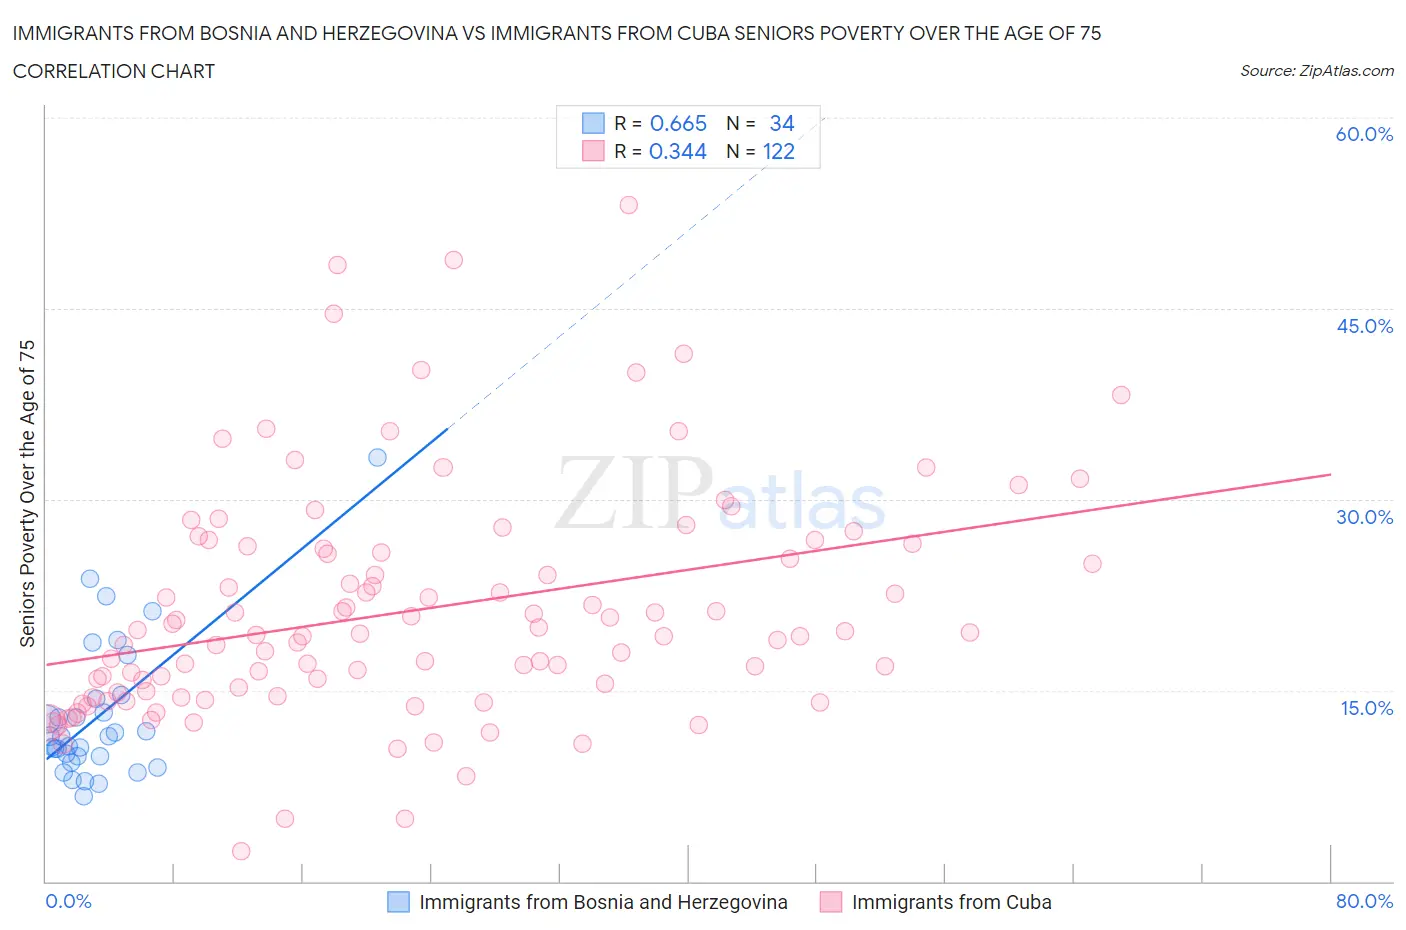 Immigrants from Bosnia and Herzegovina vs Immigrants from Cuba Seniors Poverty Over the Age of 75